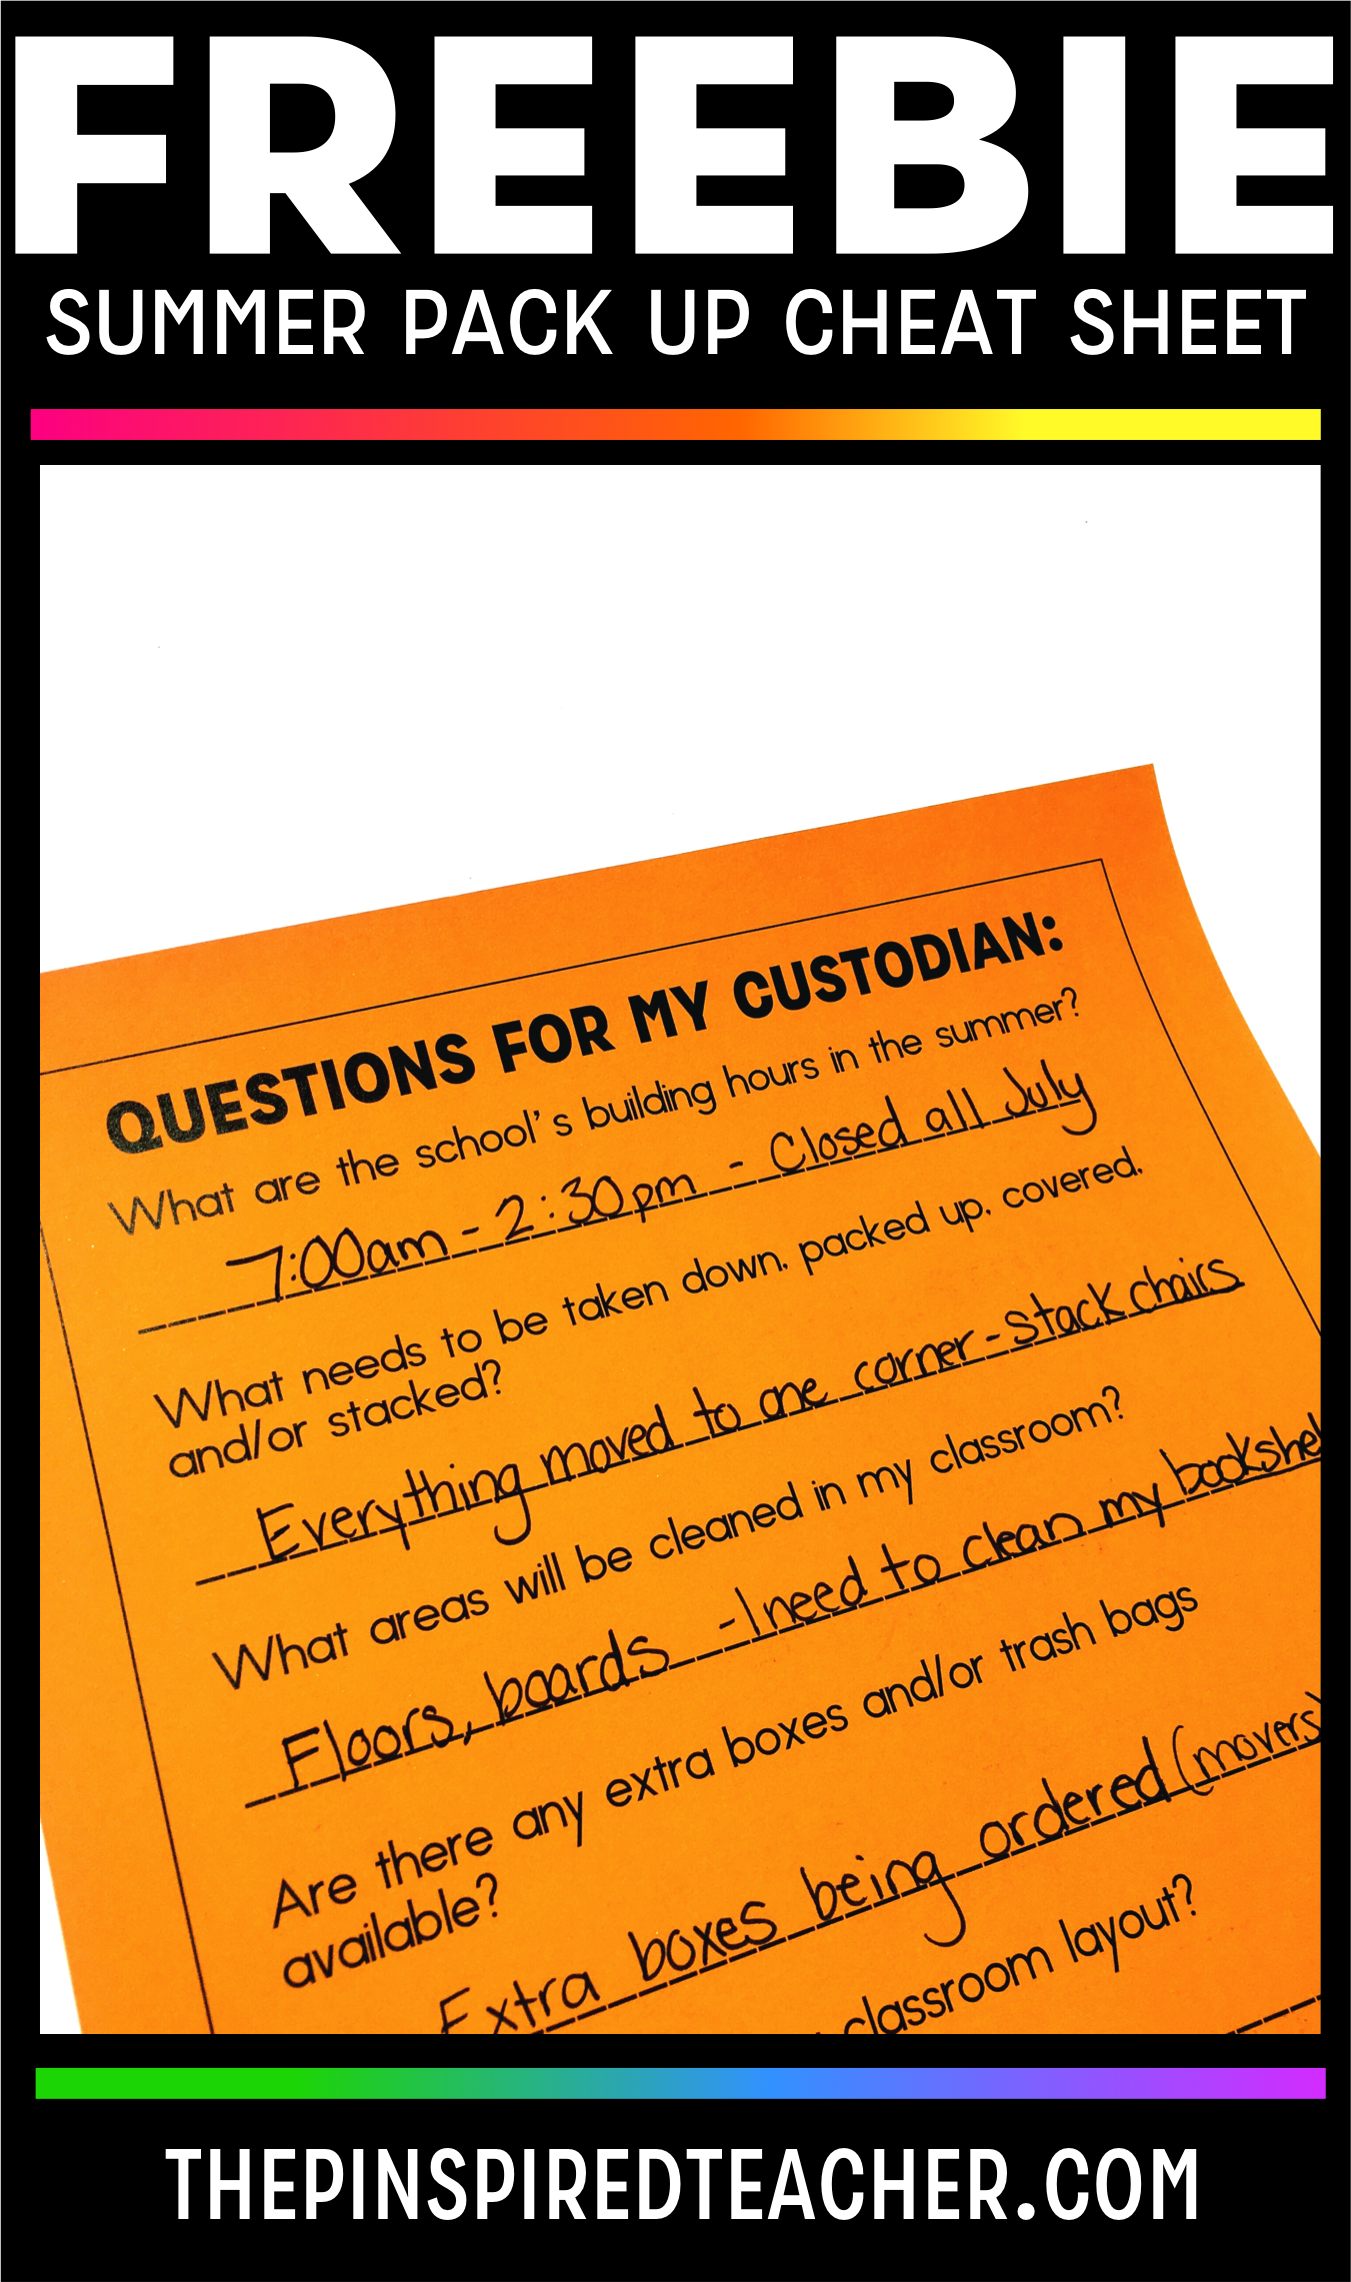 Free Summer Pack Up Cheat Sheet for Questions a Teacher Should Ask Their Custodian Before They Leave for Summer by The Pinspired Teacher